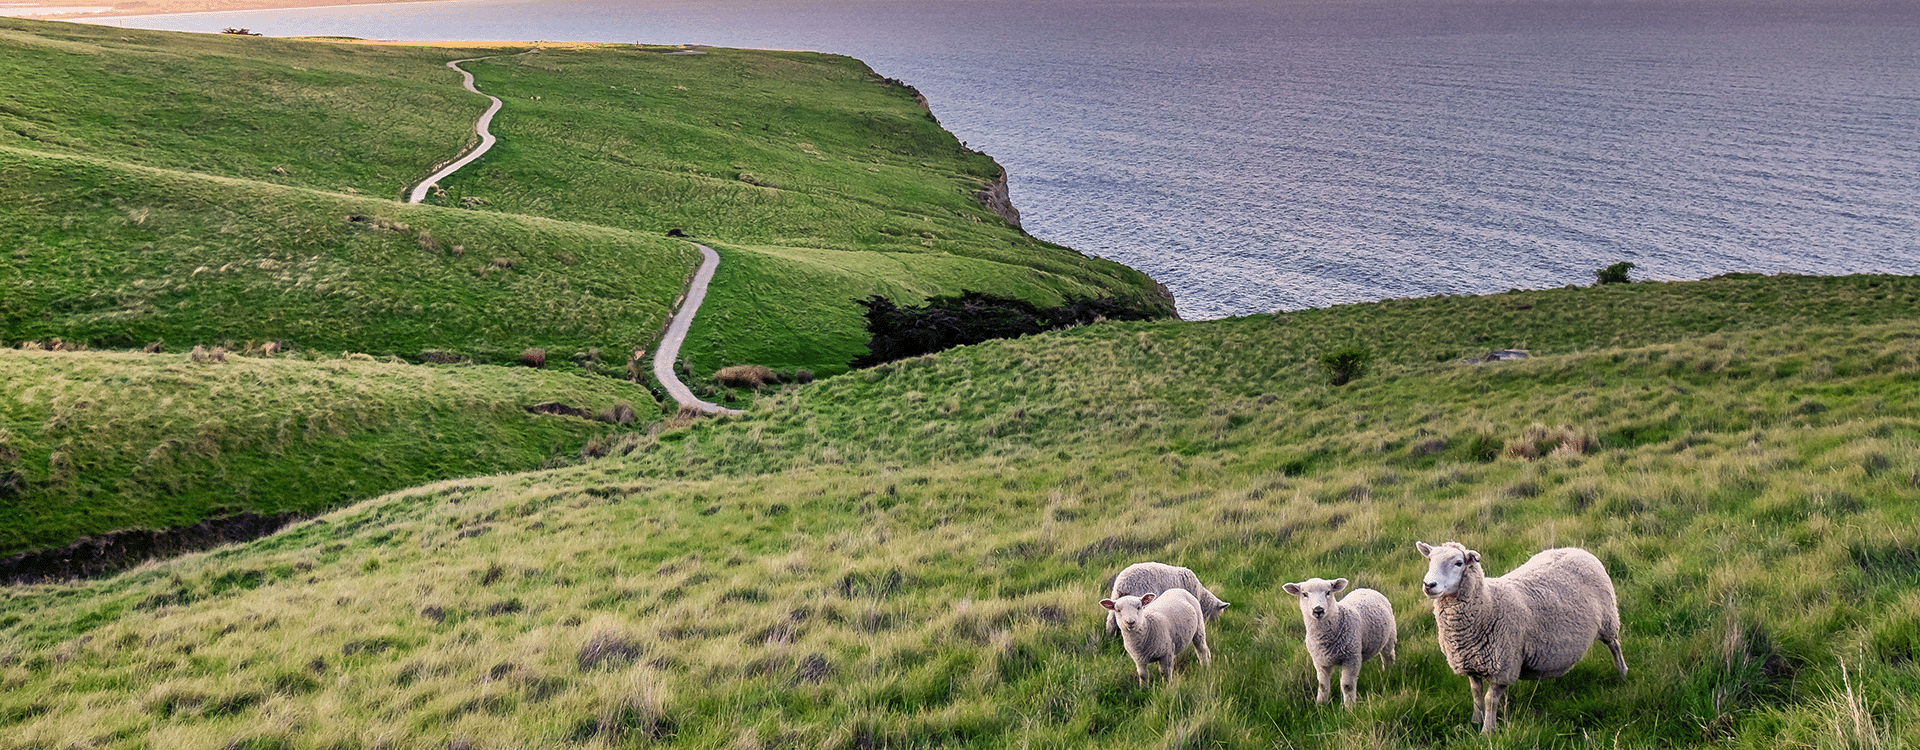 Picture of sheep in New Zealand paddock beside sea